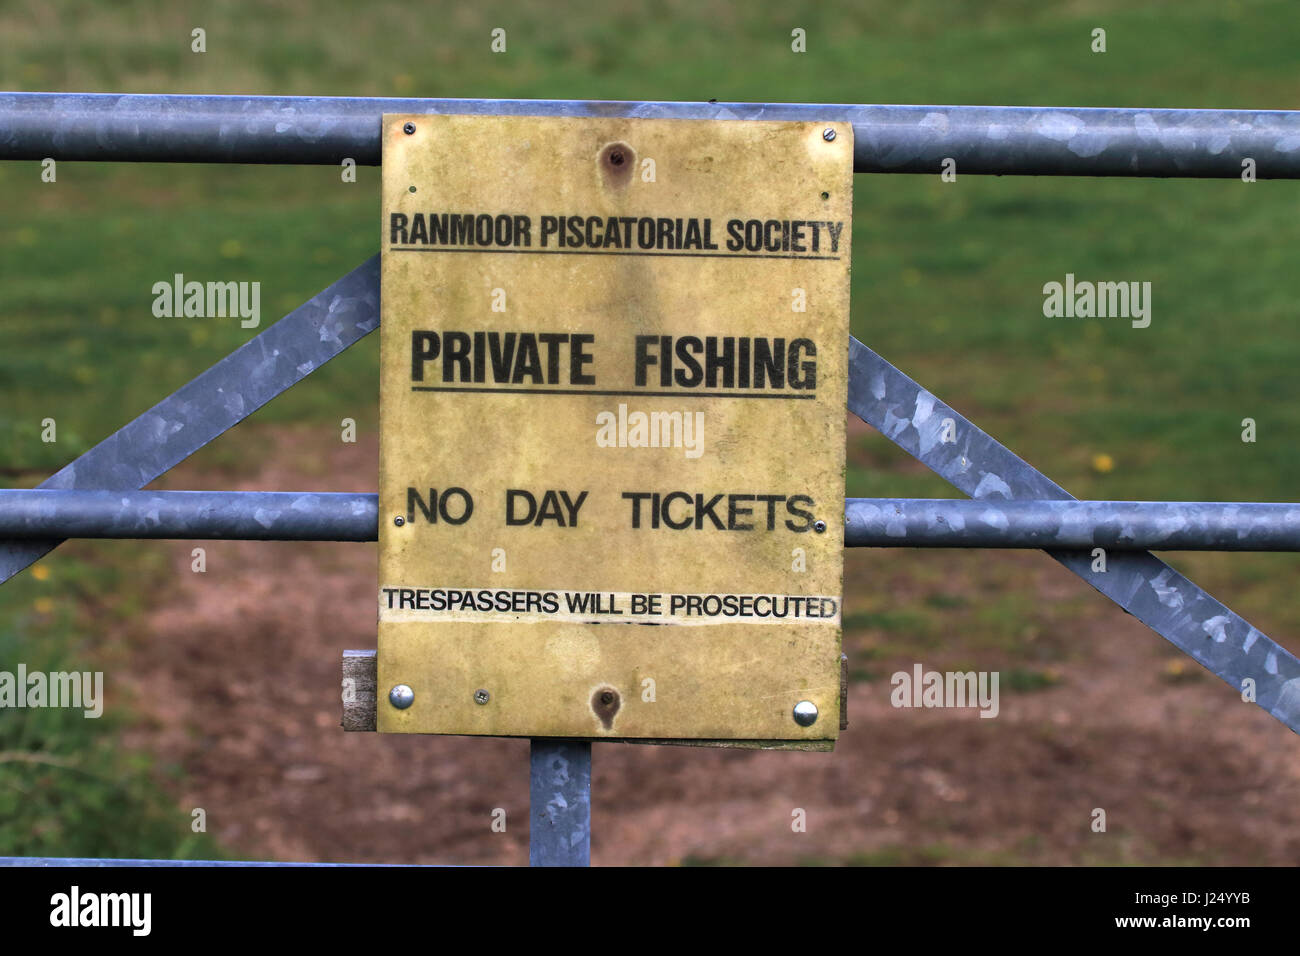 Sign on gate advising of private fishing for a fishing society Stock Photo